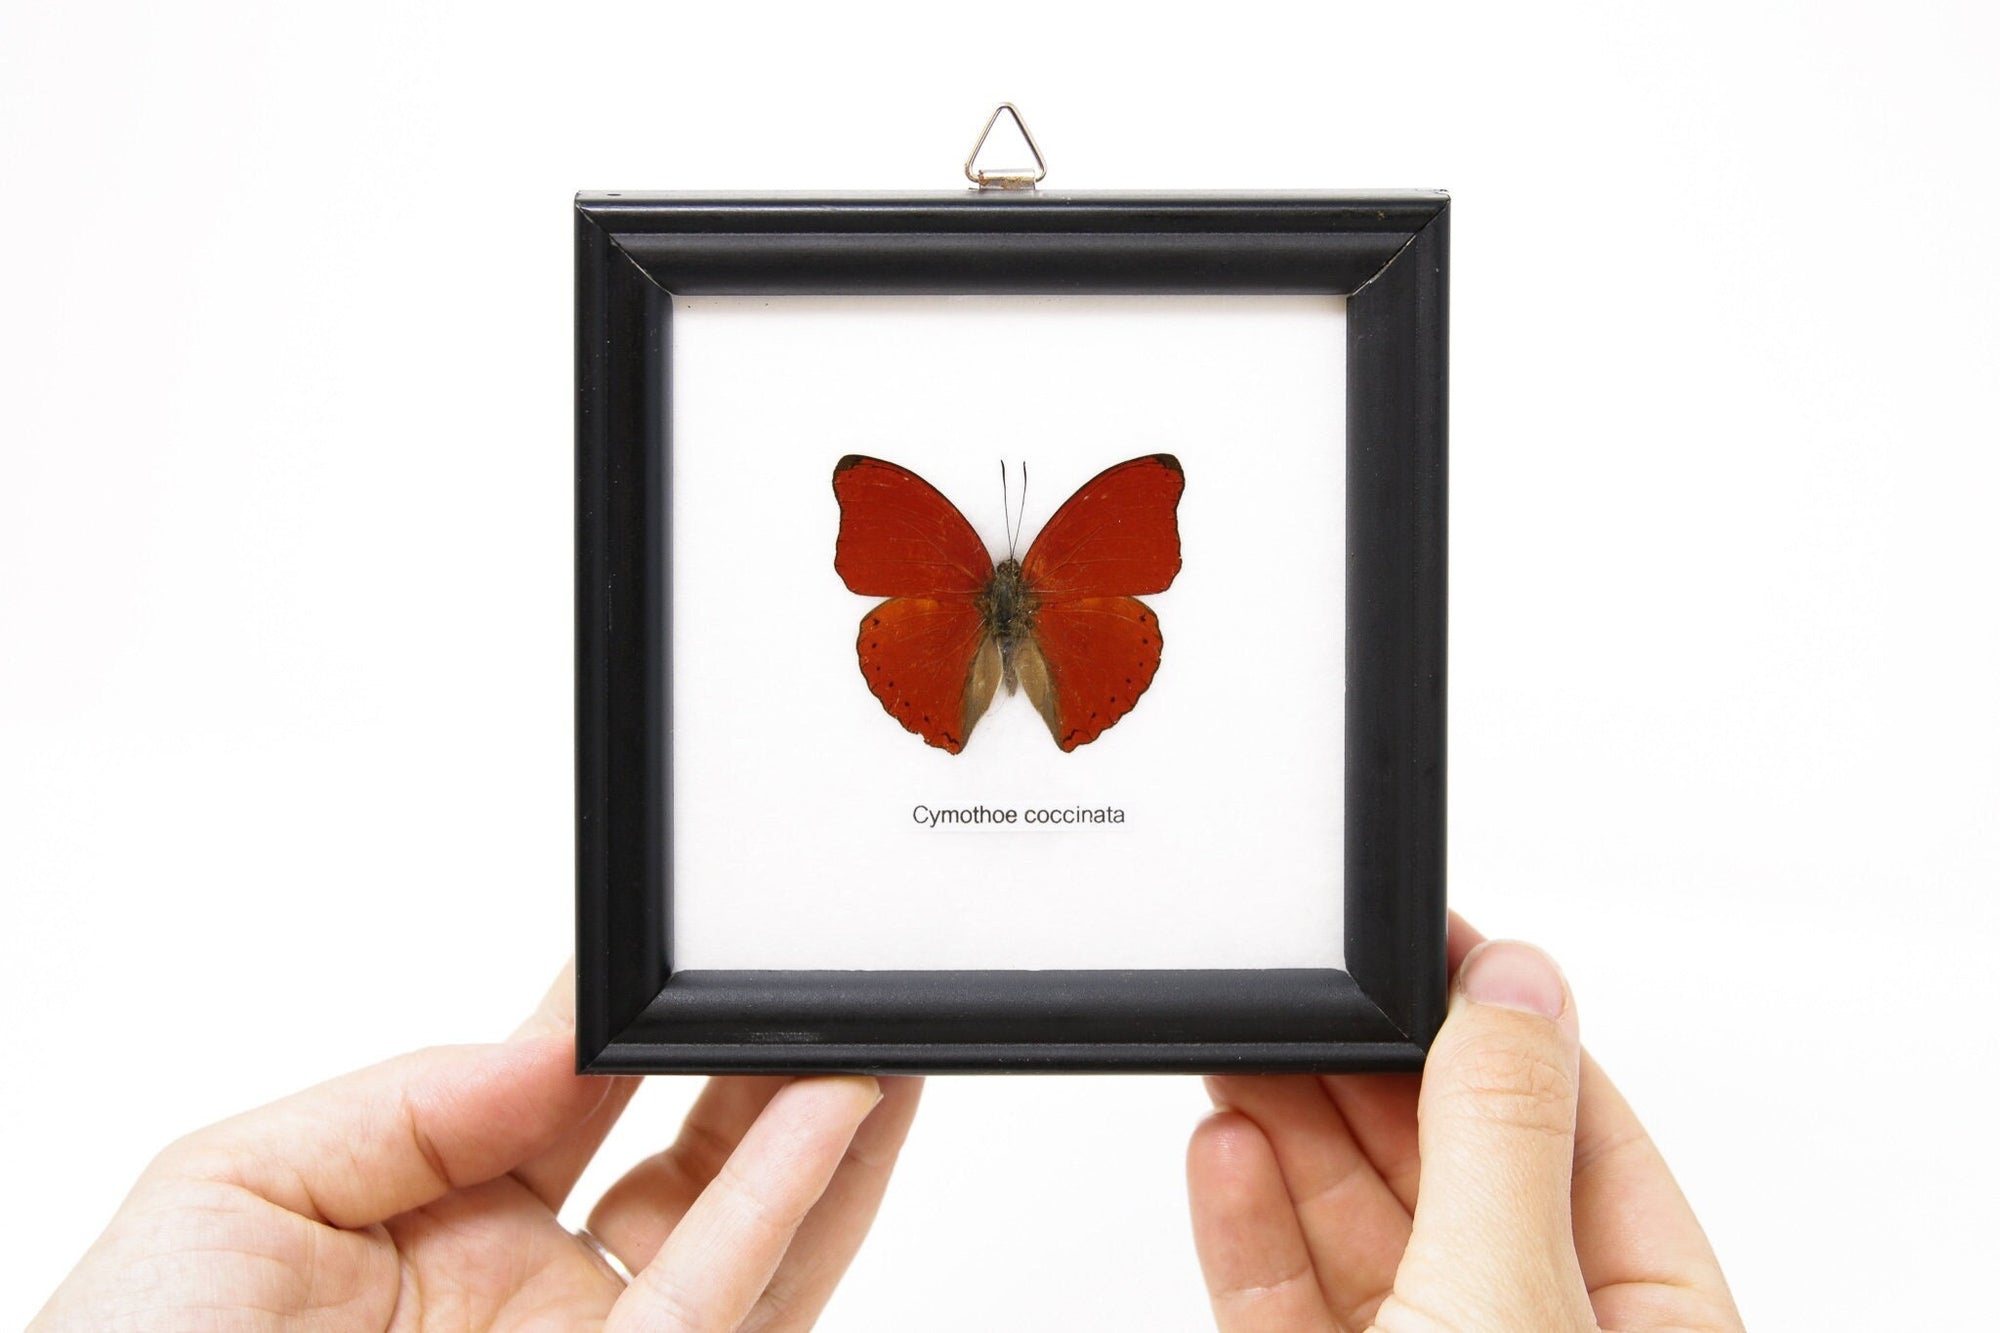 The Blood-red Glider Butterfly (Cymothoe sangaris) Real Butterfly Mounted Under Glass, Wall Hanging Home Décor Framed 5 x 5 In. Gift Boxed